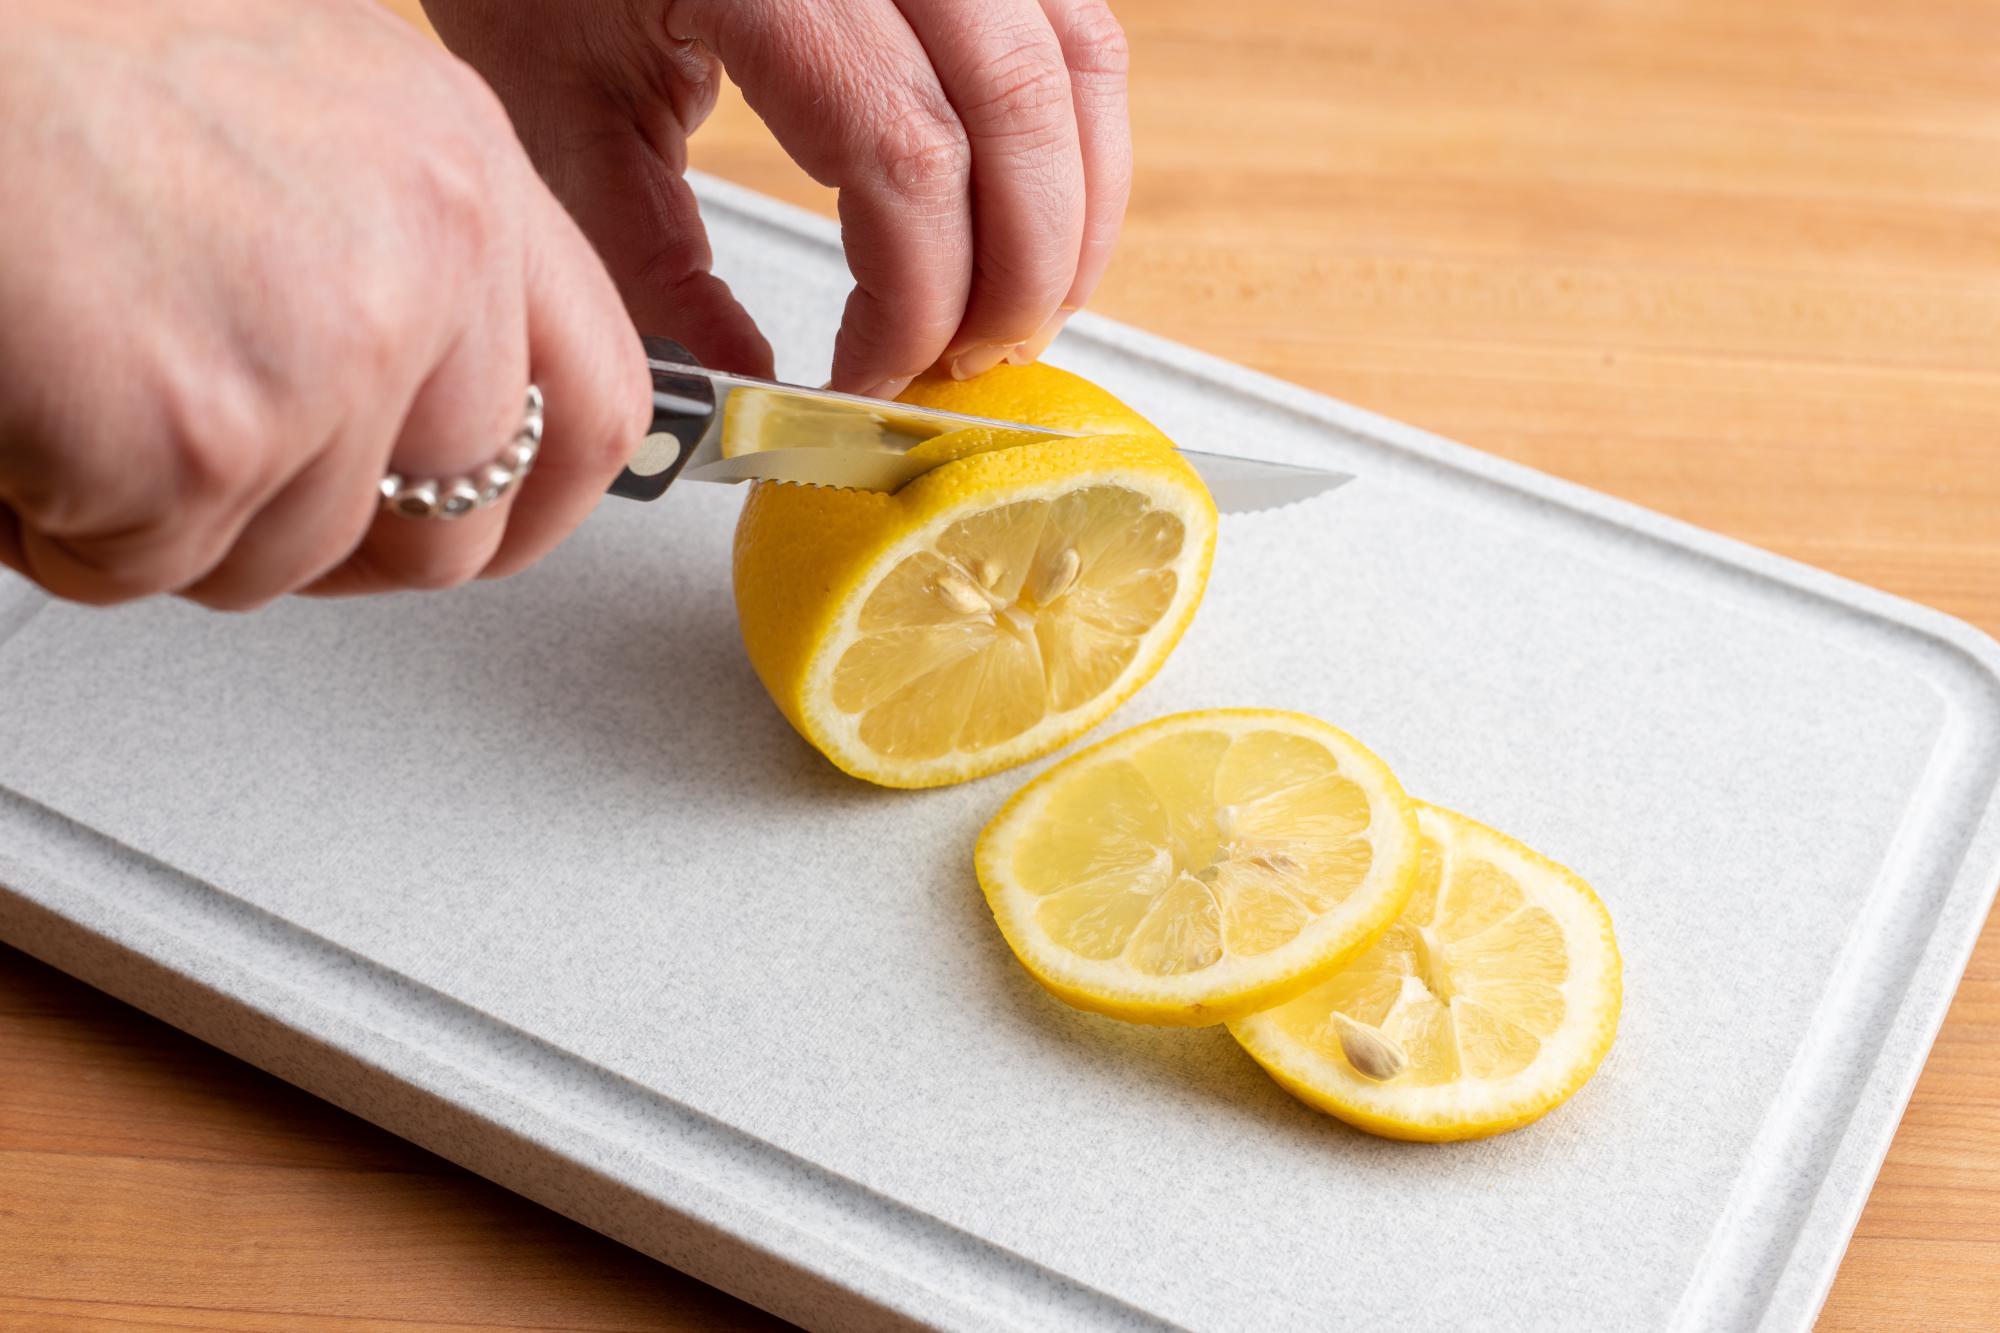 Slicing lemon with a Trimmer.